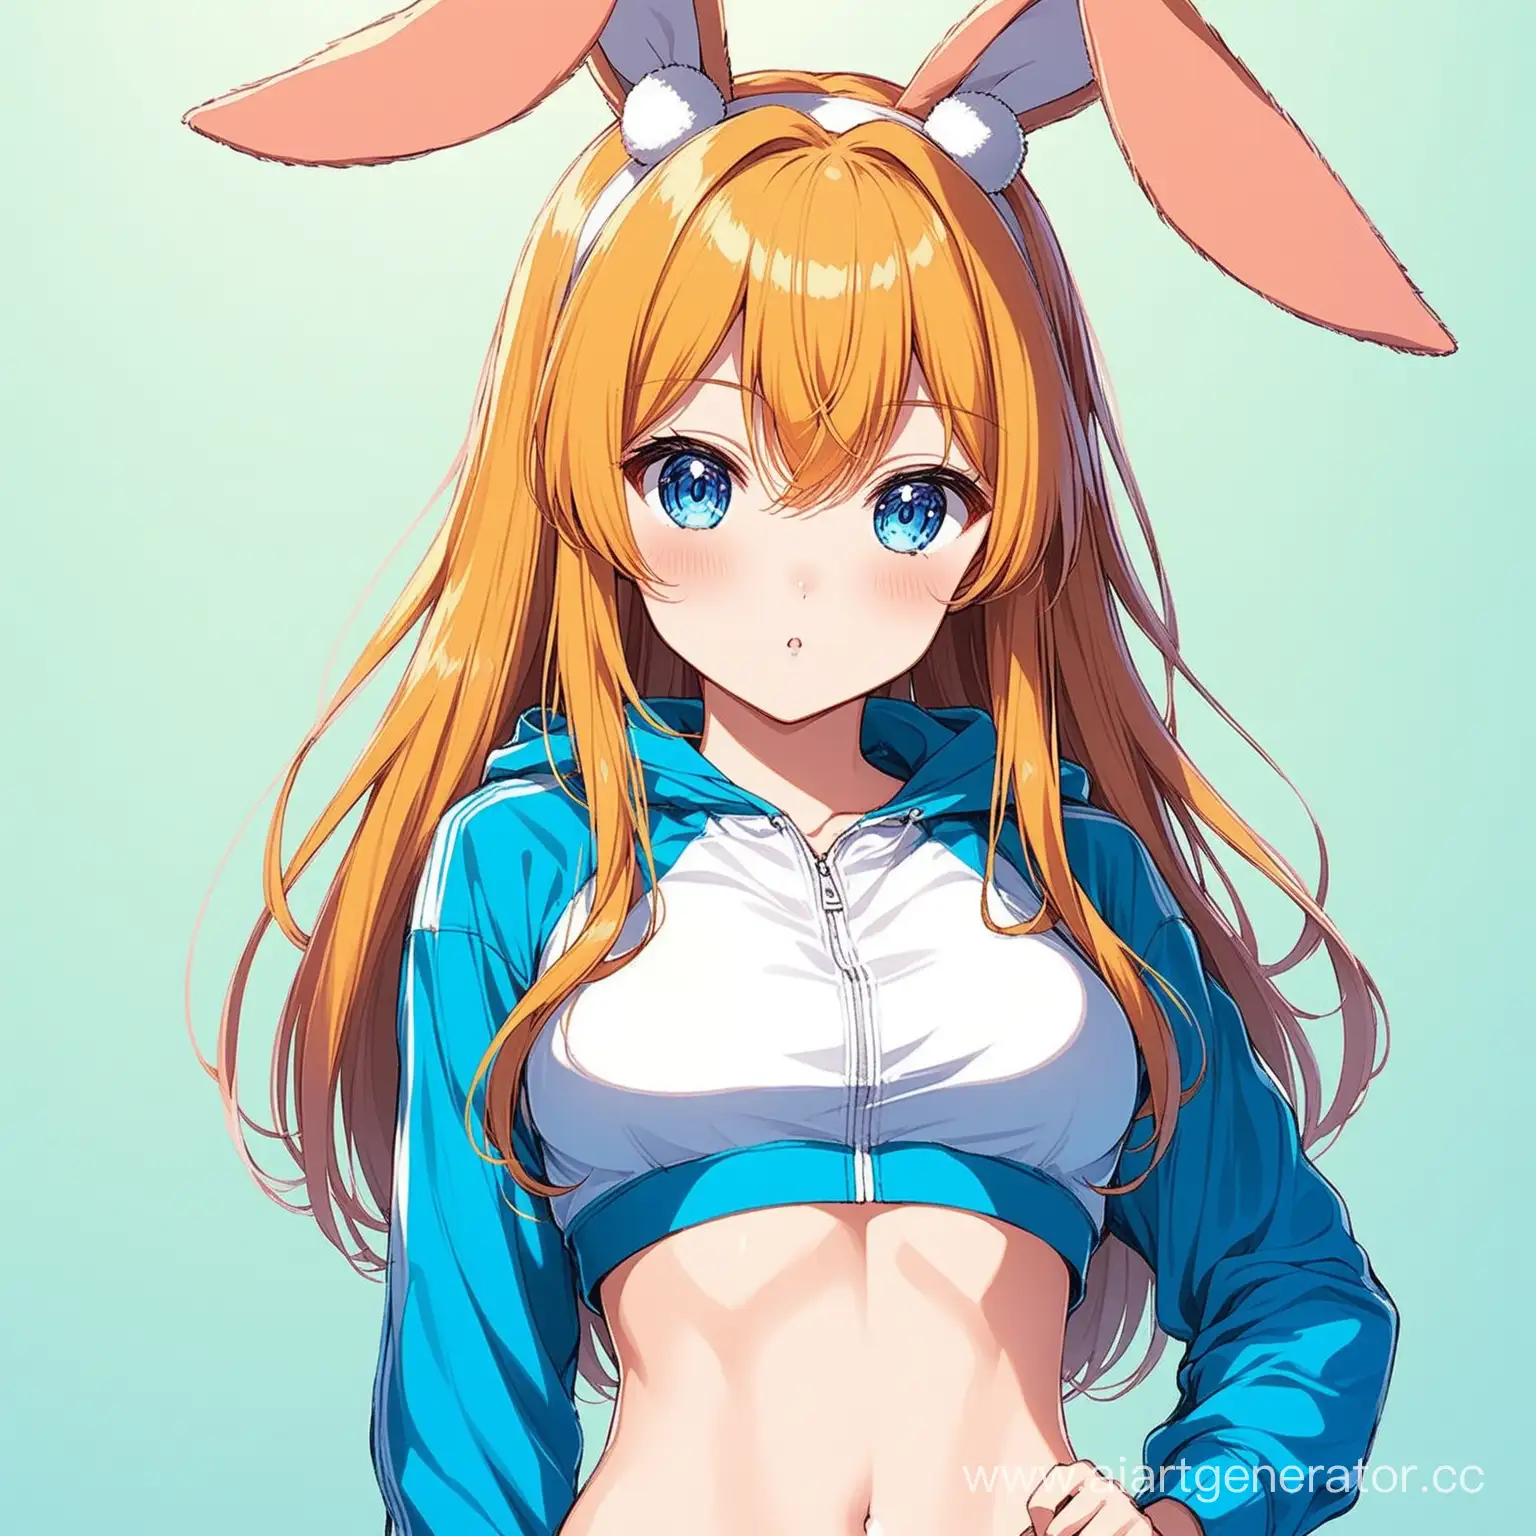 Sporty-Anime-Girl-with-Bunny-Ears-Dynamic-Athletic-Style-Illustration